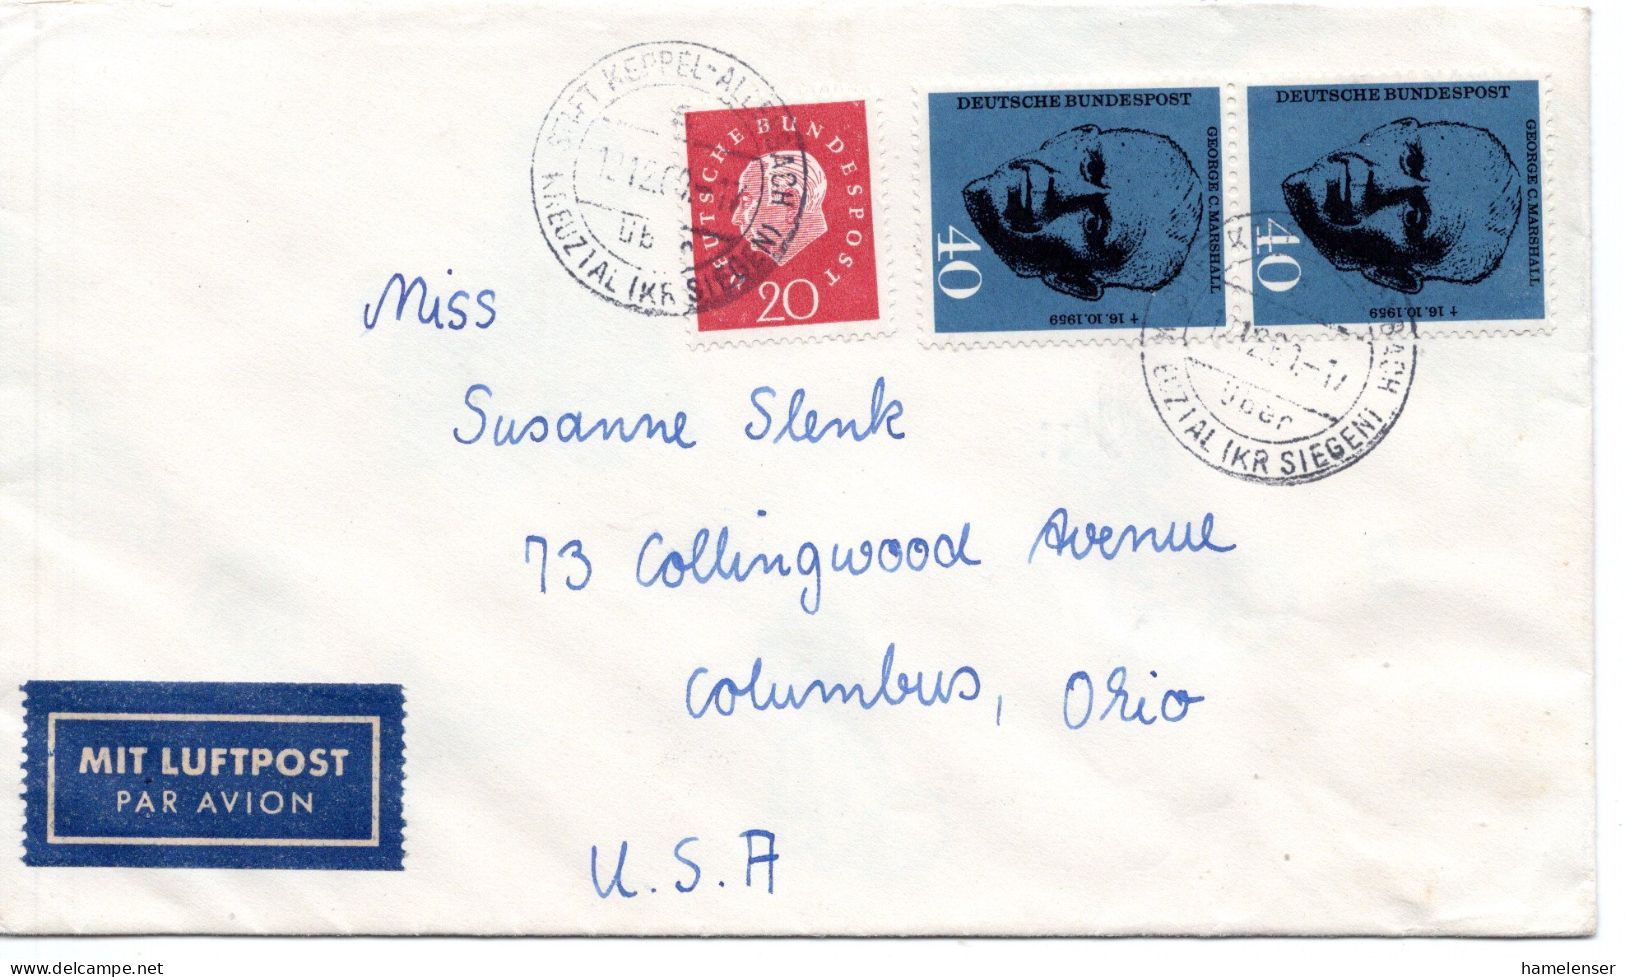 68847 - Bund - 1960 - 2@40Pfg Marshall MiF A LpBf STIFT KEPPEL-ALLENSBACH -> Columbus, OH (USA) - Covers & Documents